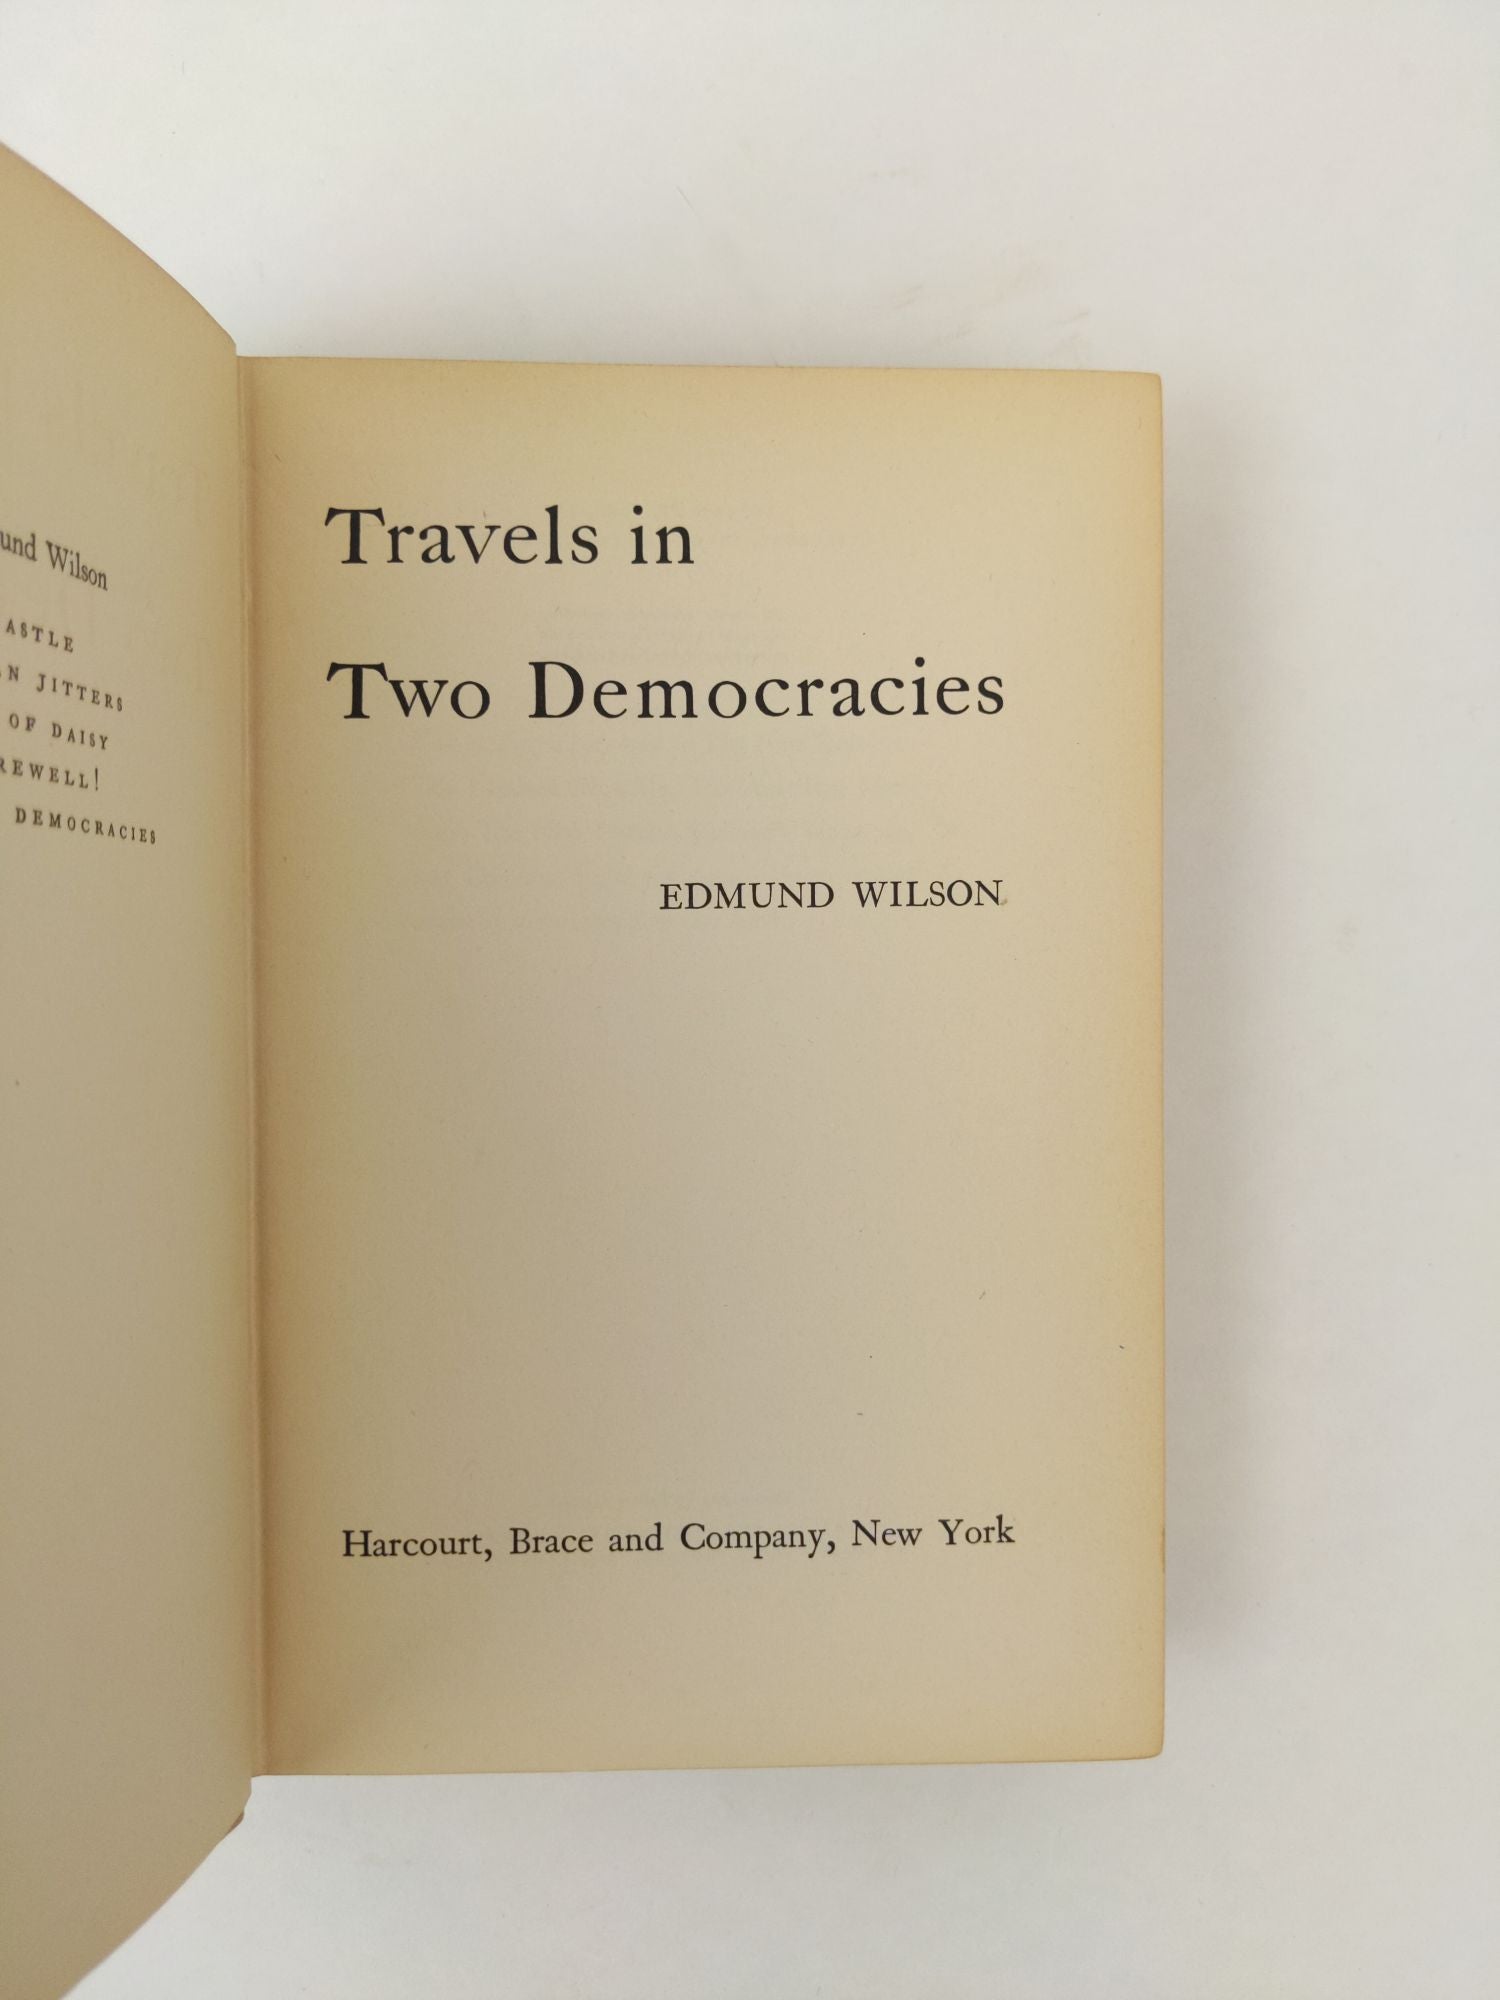 Product Image for TRAVELS IN TWO DEMOCRACIES [SIGNED]